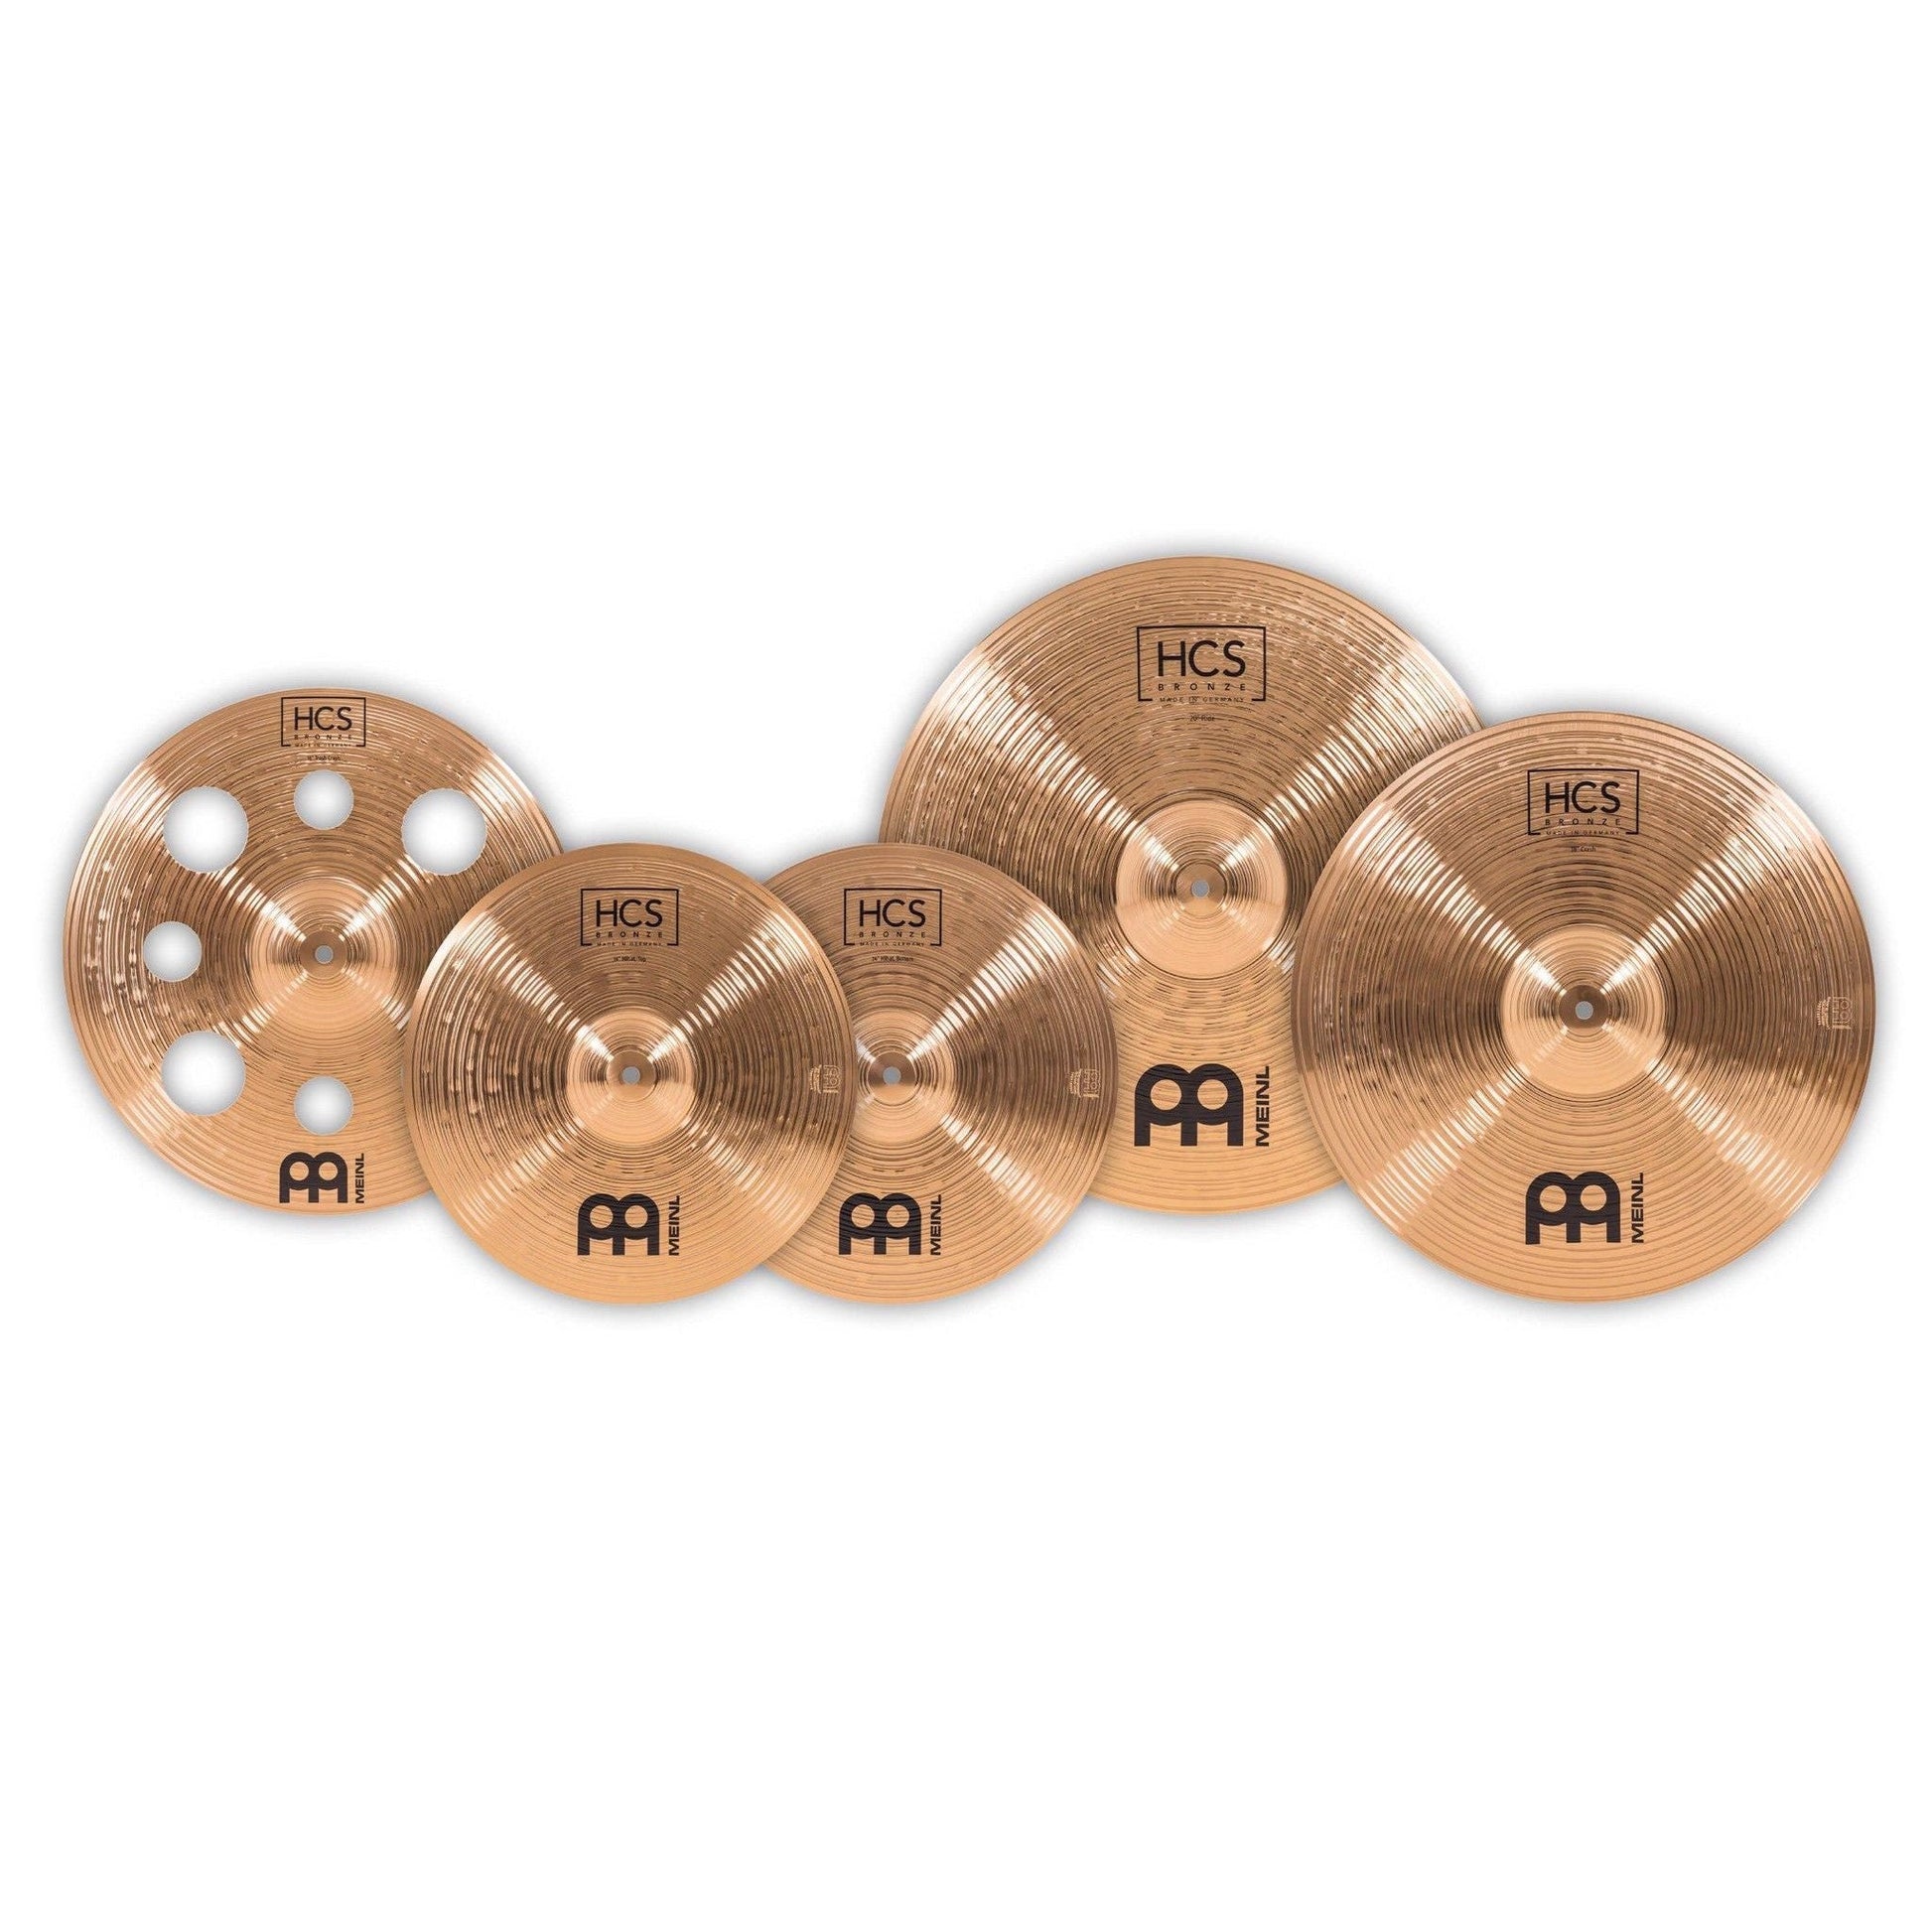 Cymbal Meinl HCS Bronze Expanded Cymbal Set - HCSB14161820 - Việt Music